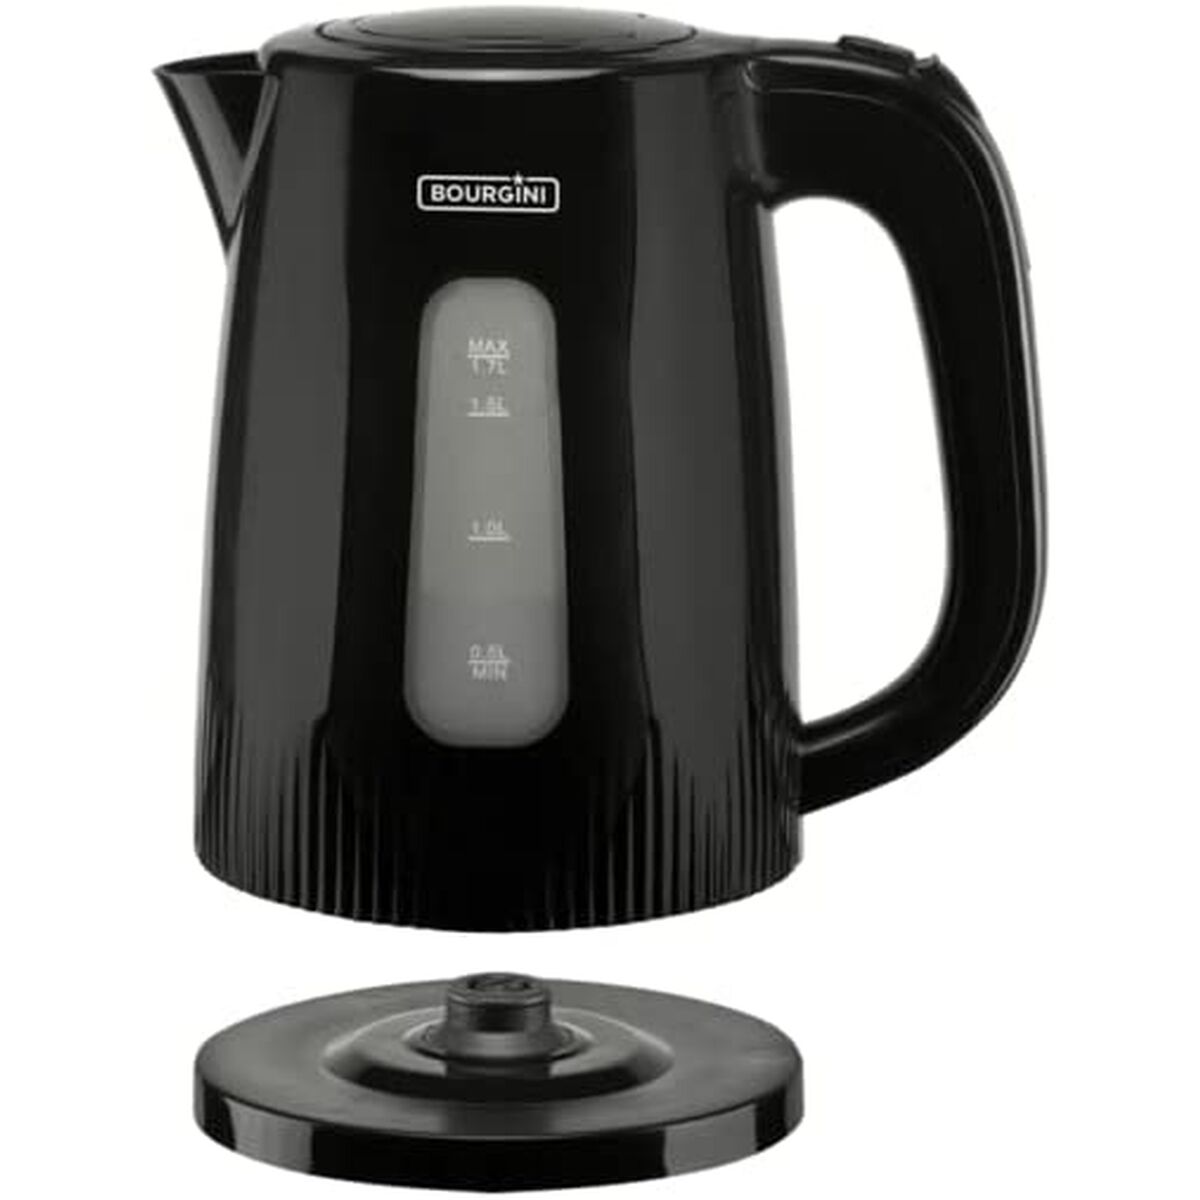 Water Kettle and Electric Teakettle Bourgini 230016 Black 2200 W